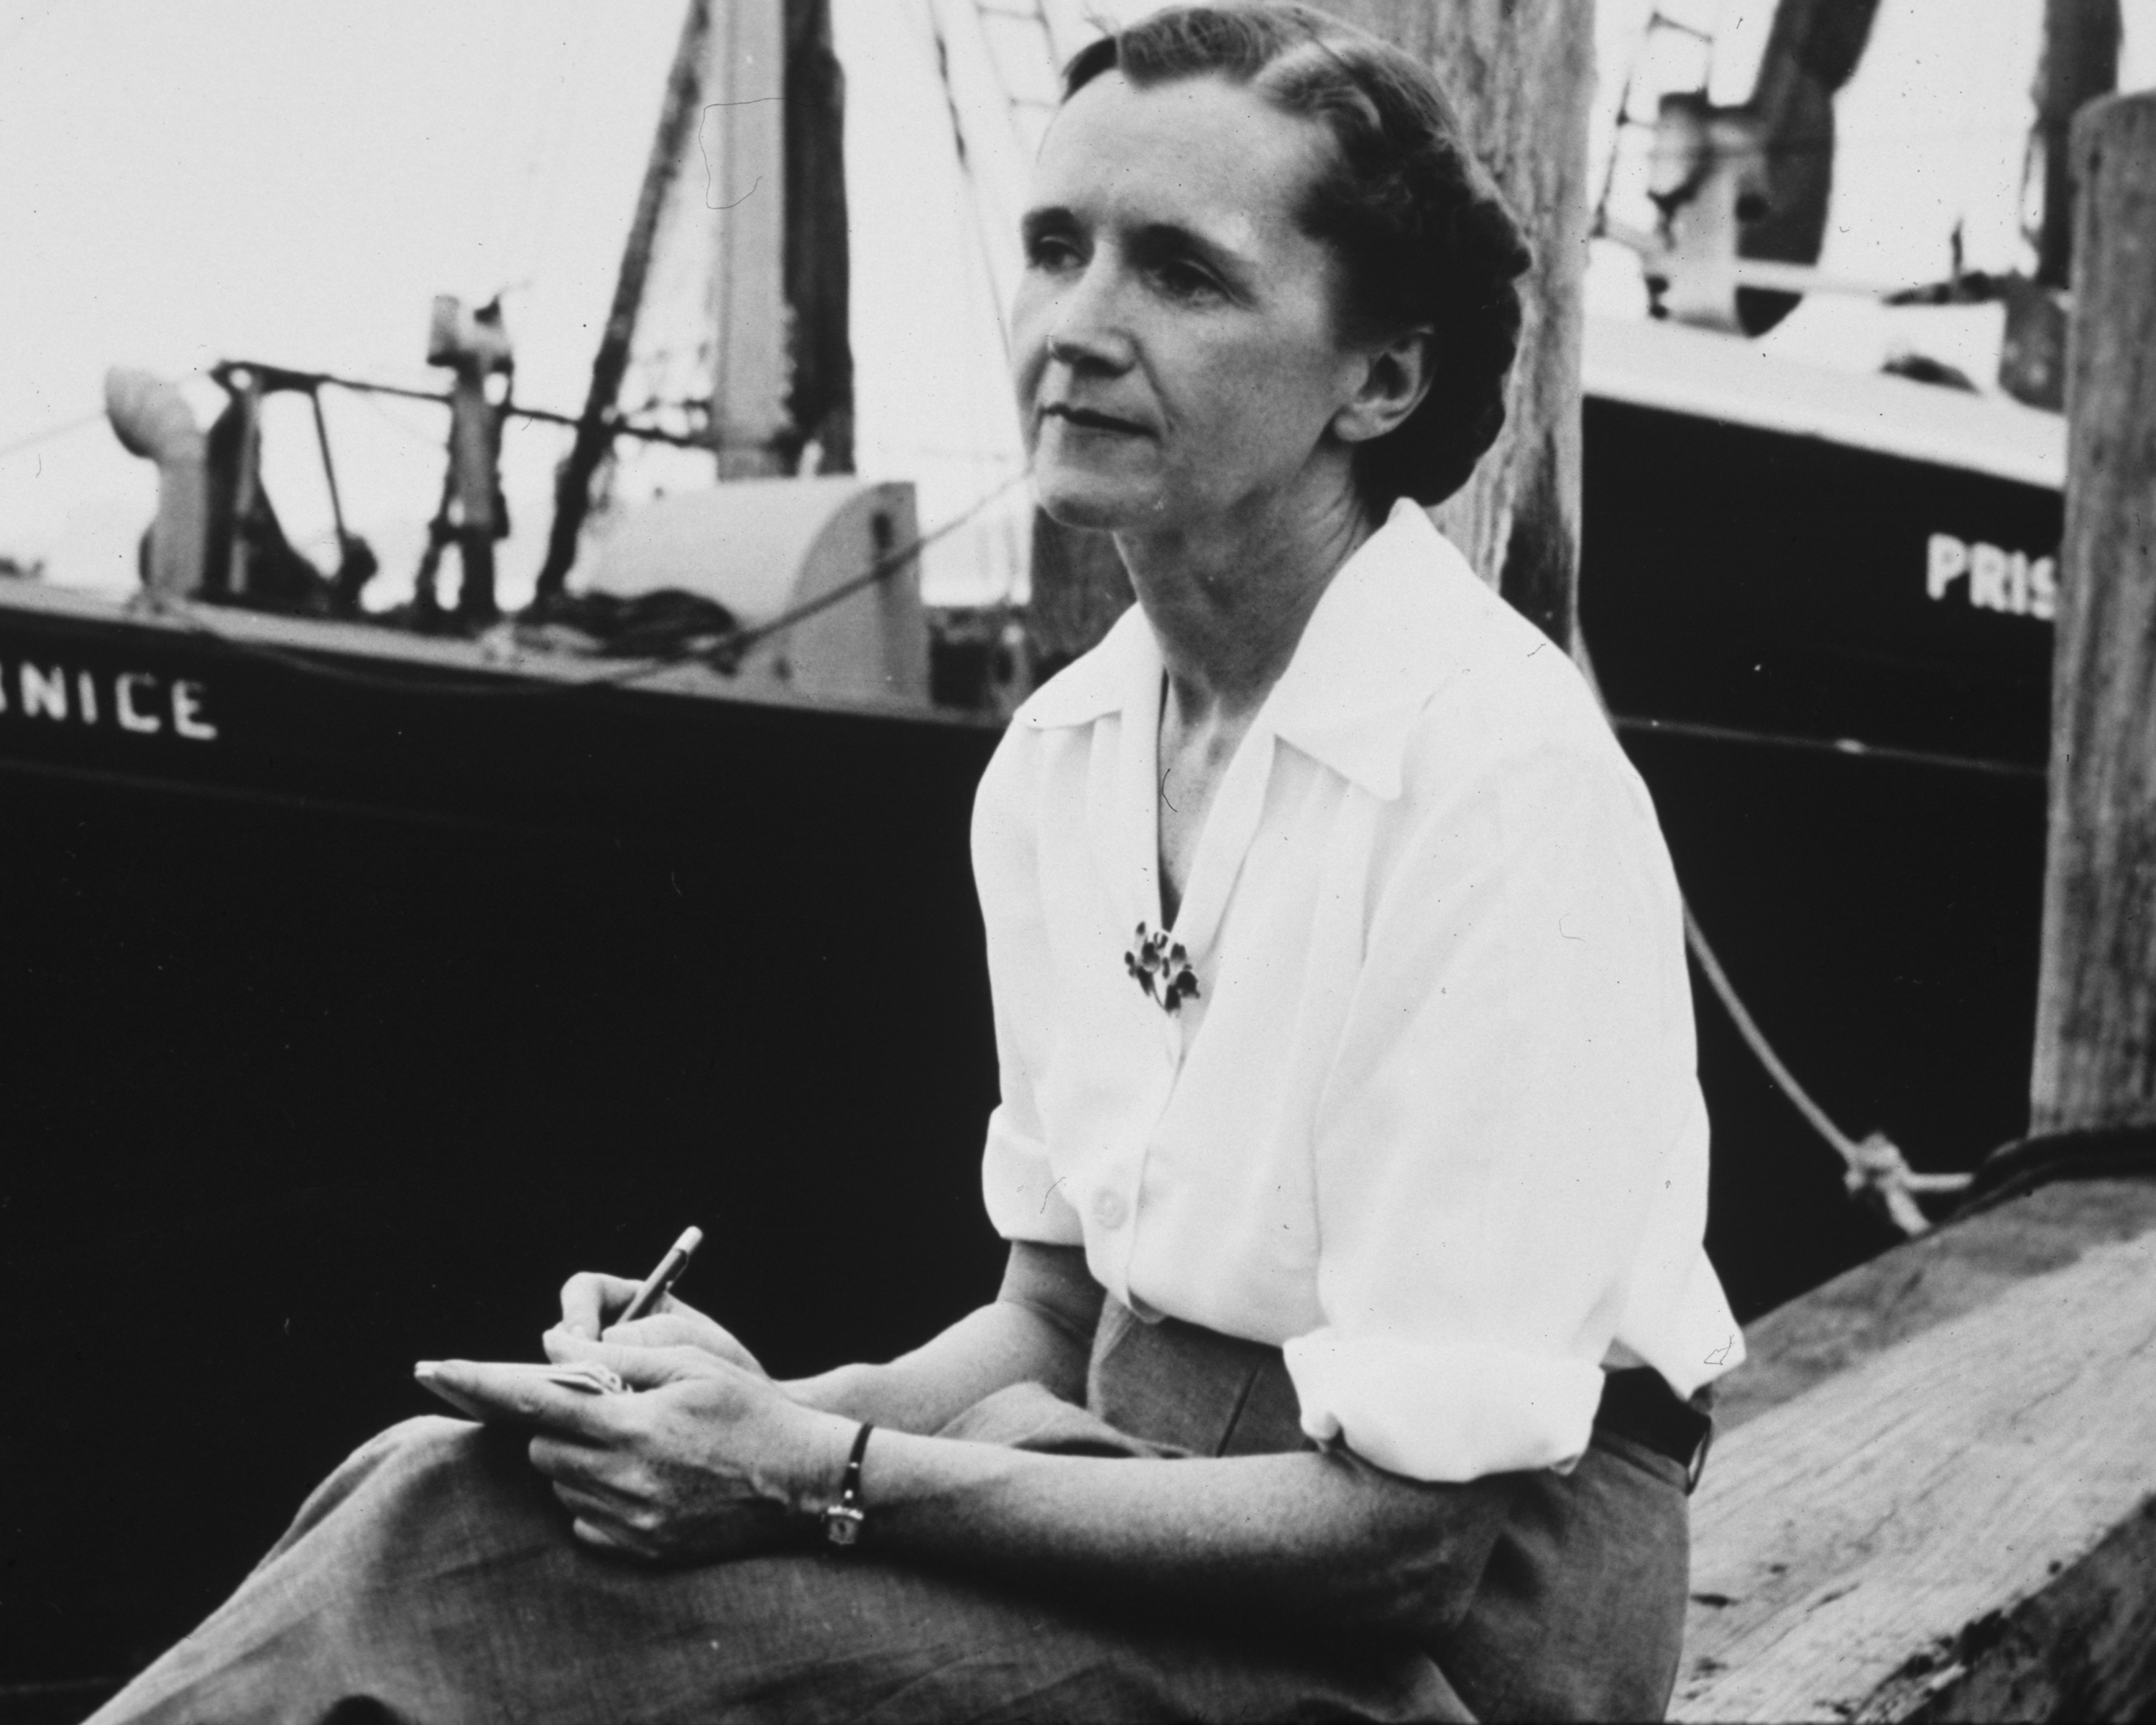 Rachel Carson sits with pen in hand on a dock, with a boat behind her, in this black-and-white historic photo.